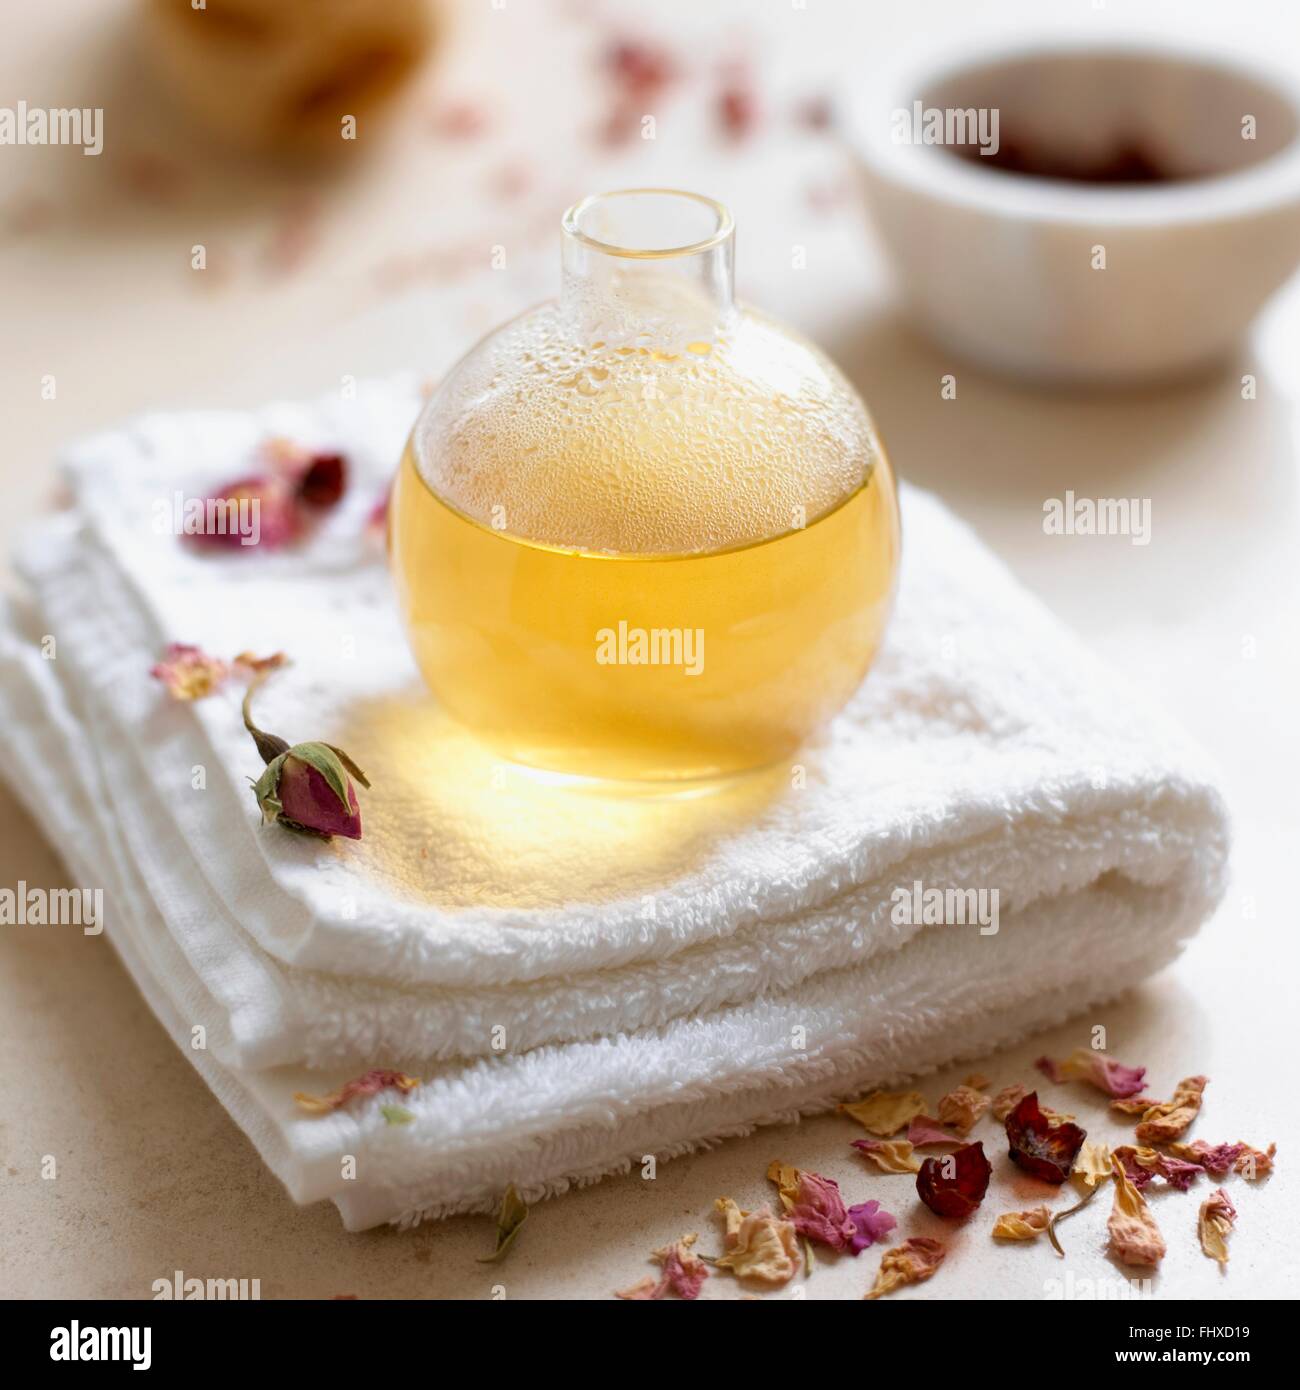 Bottle of rose and marigold bath oil, on folded towel Stock Photo